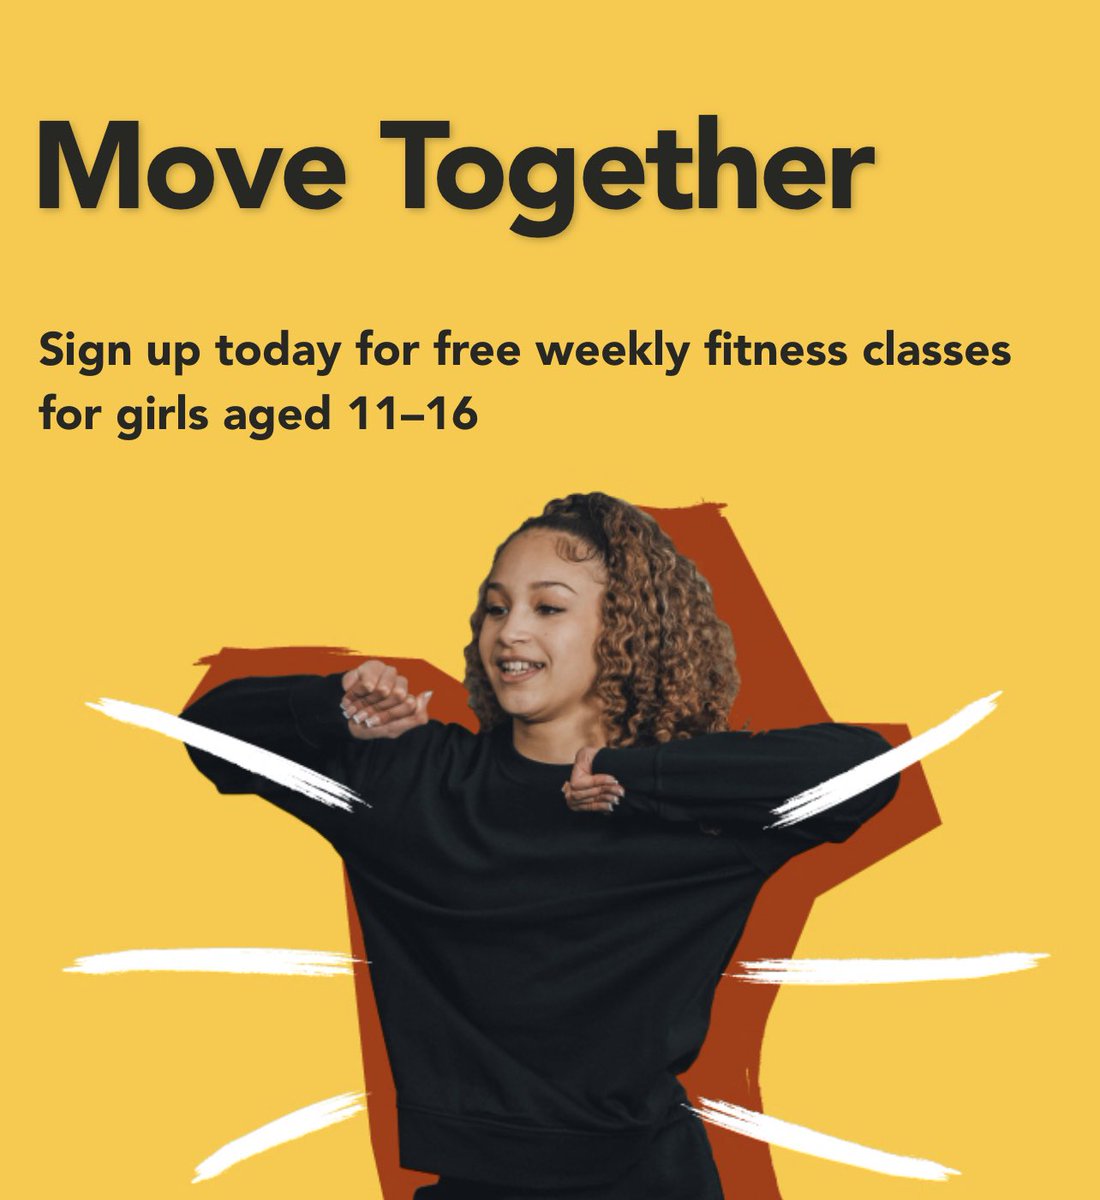 ⚪️Our Free Move Together Fitness Classes for girls aged 11-16 years old⚪️

⚪️Run by Nuffield Health instructors
⚪️Register here: nuffieldhealth.com/movetogether 

#movetogether #health #community #jointhemovement #community #communitymatters #communityevent #beckfootschool #beckoottrust